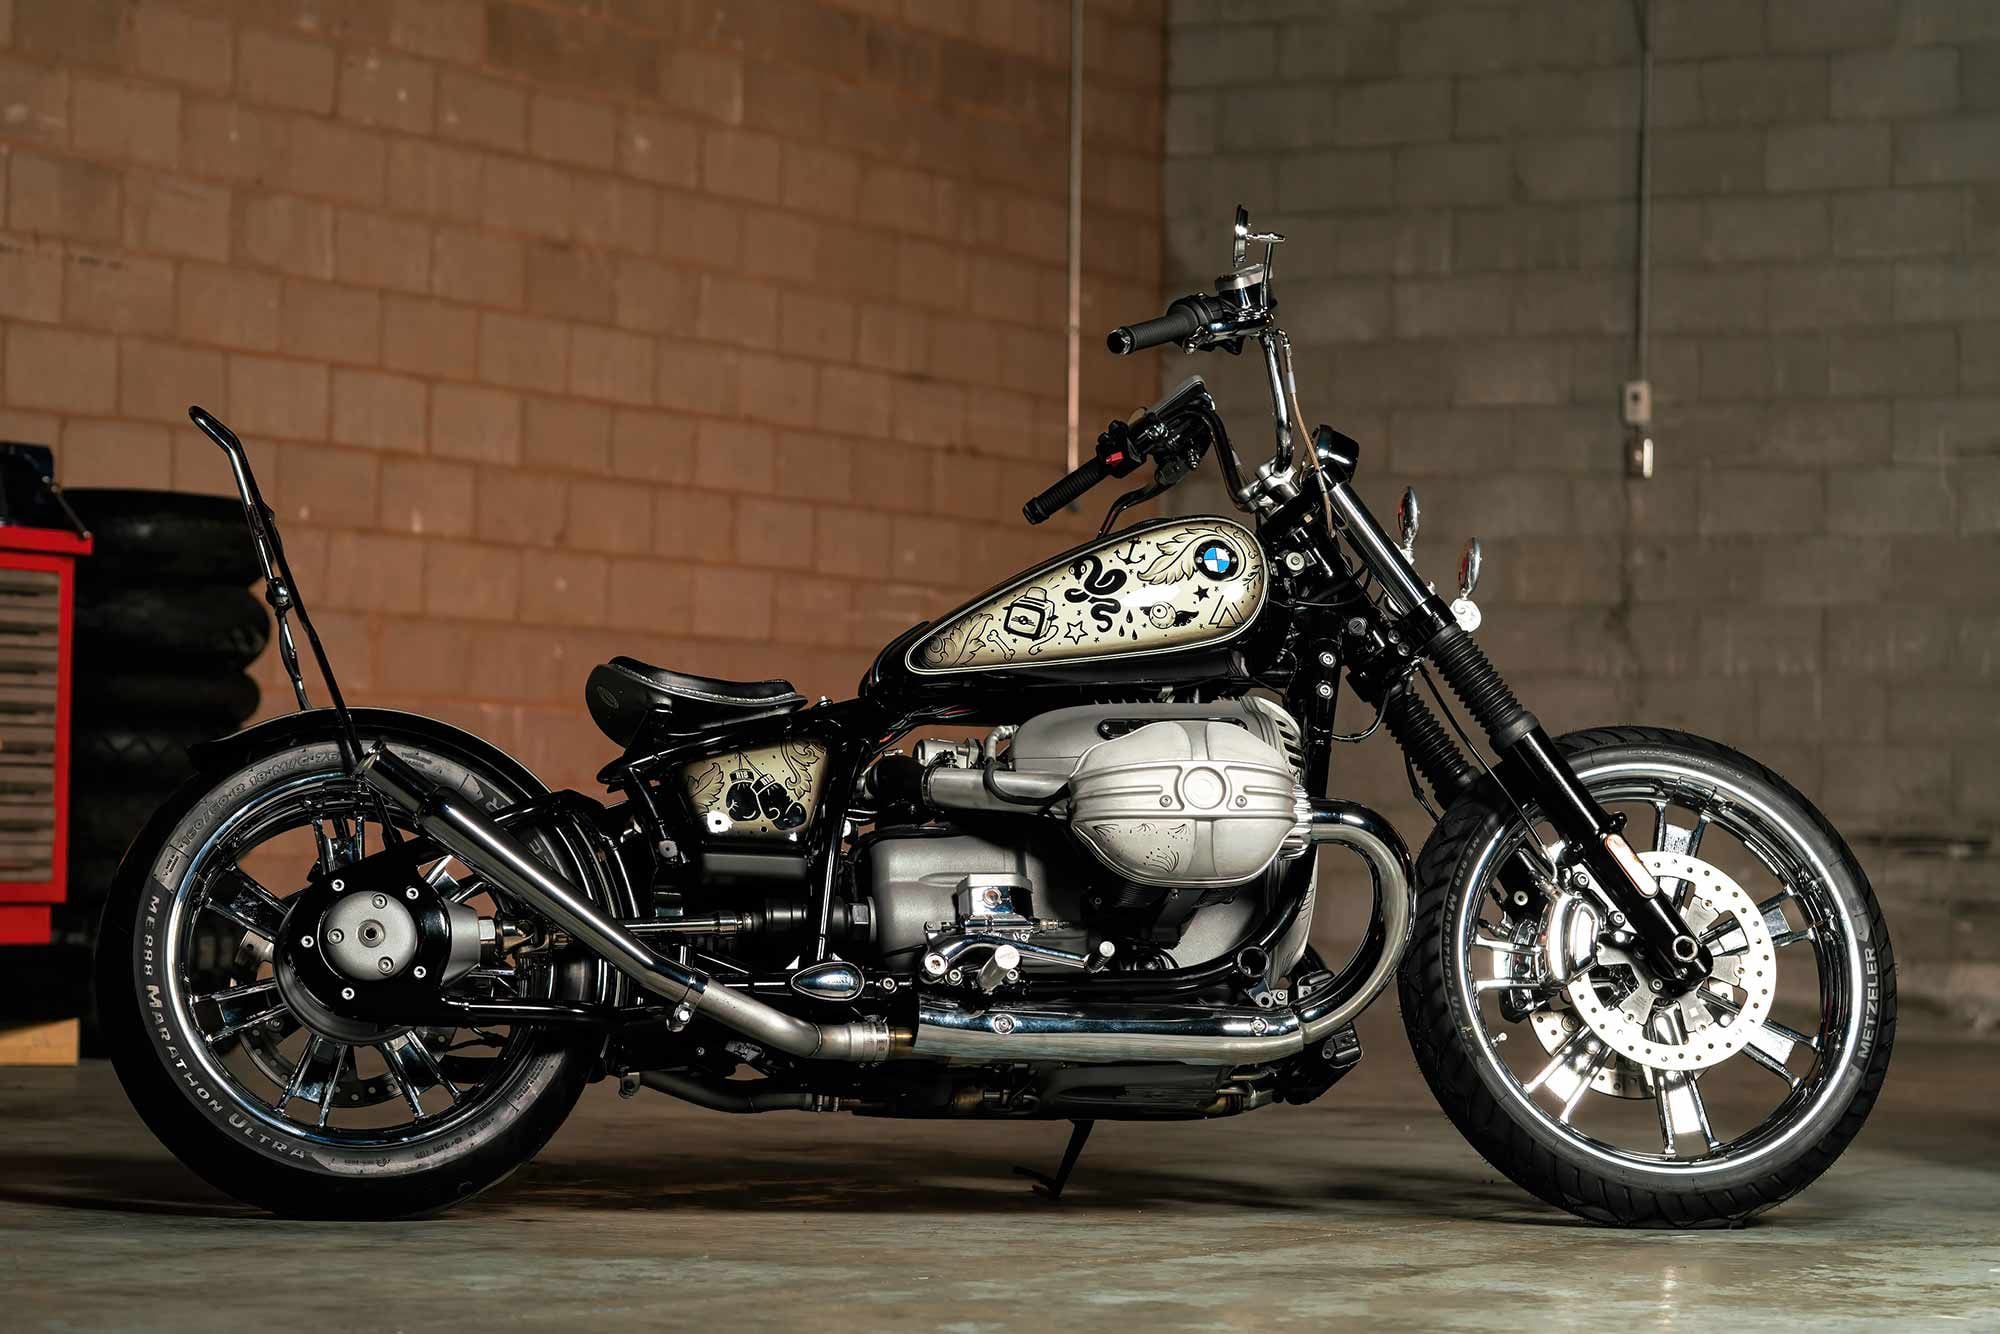 It’s officially known as the “Tattooed Chopper,” but Nick Acosta from Augment Motorworks calls his custom build “El Boxeador”—for obvious reasons.